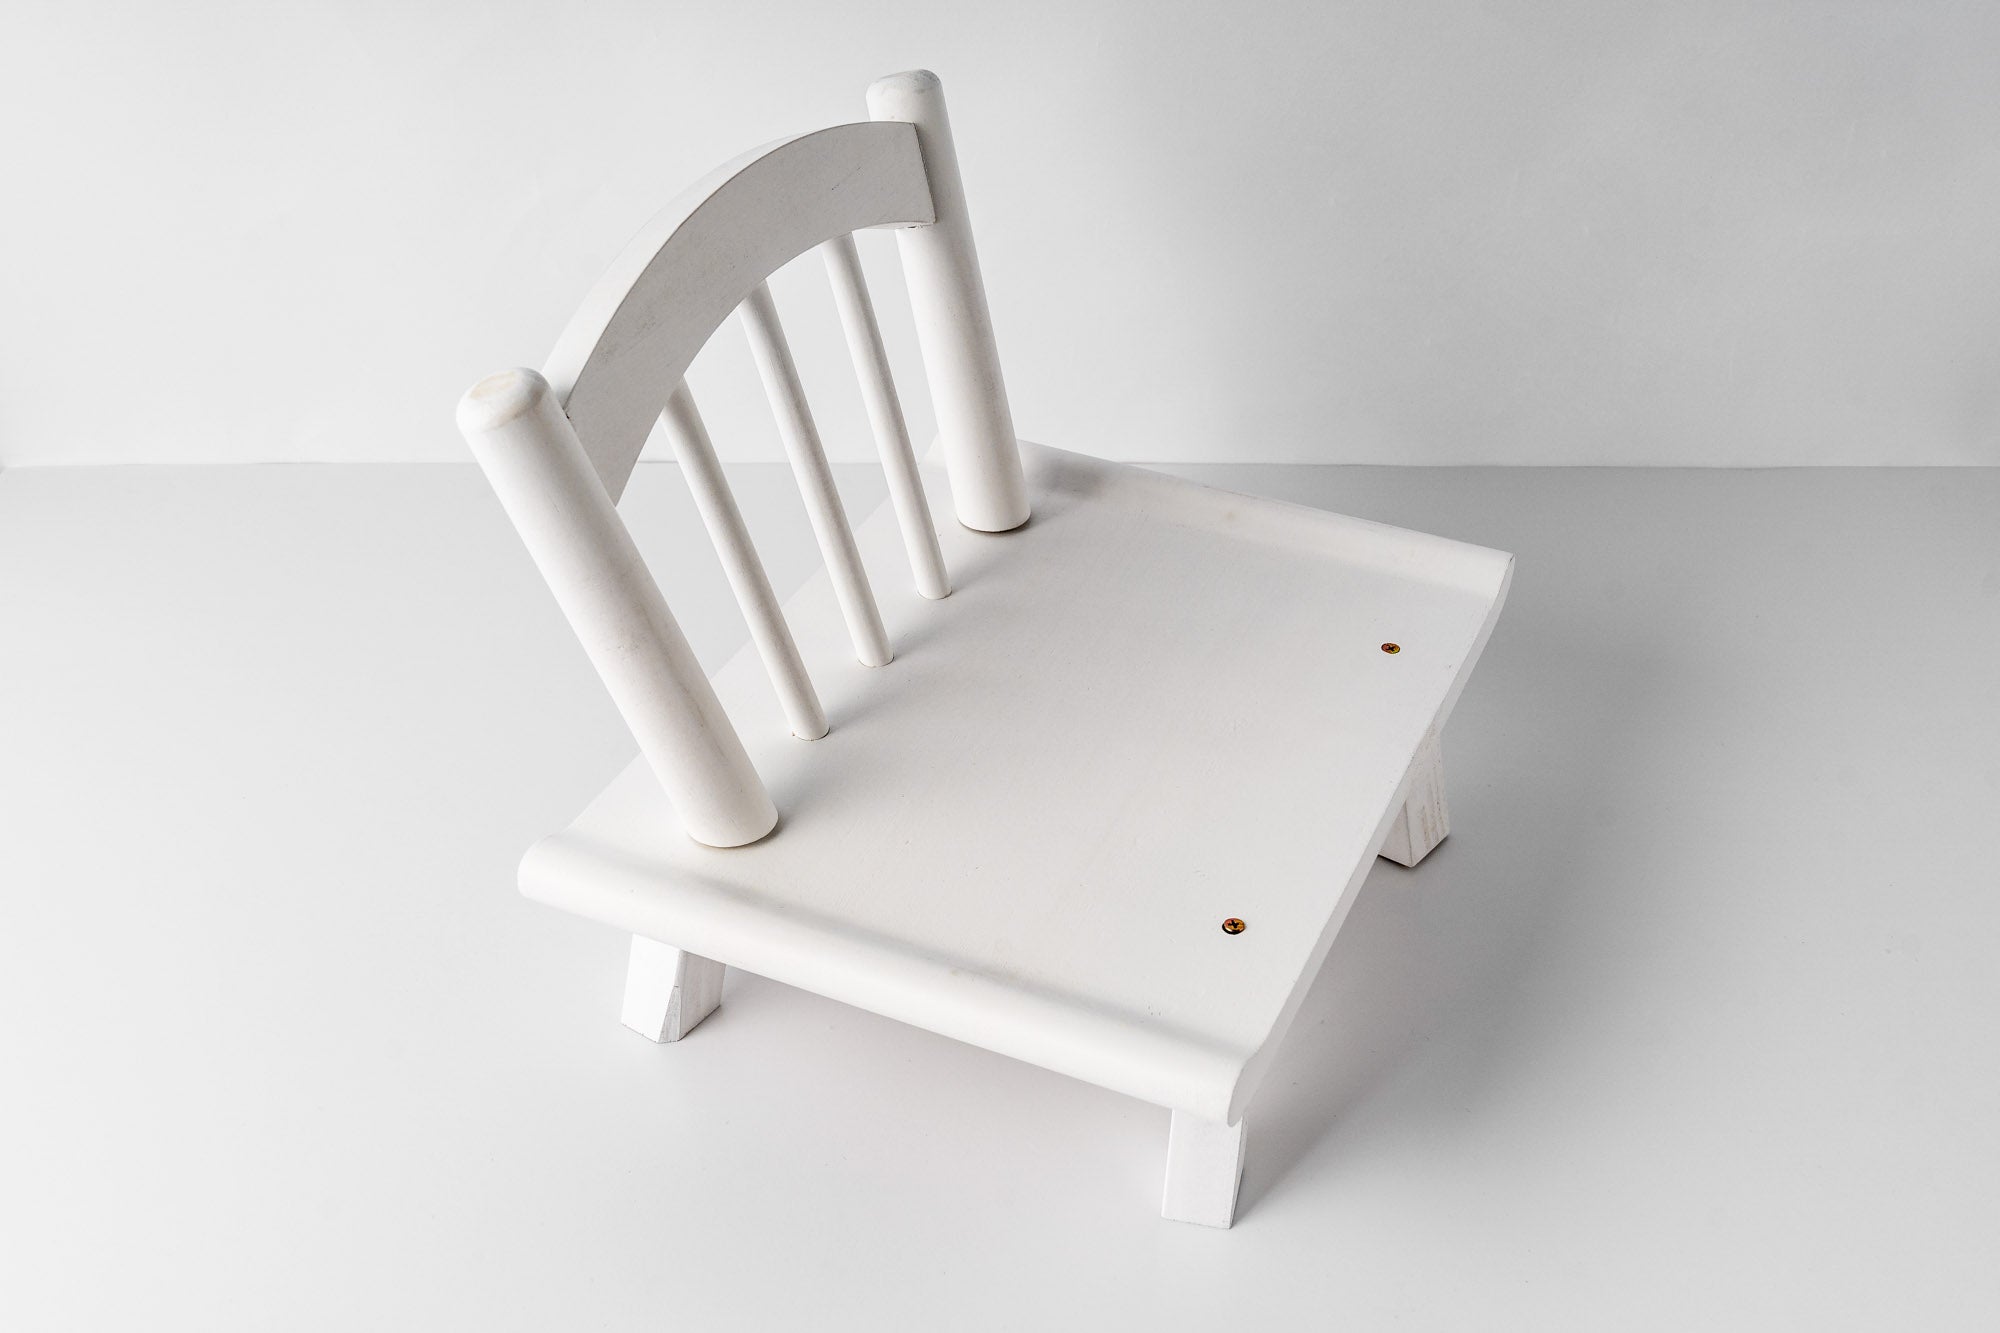 RTS Kate Newborn White Wooden Chair Photography Props US ONLY